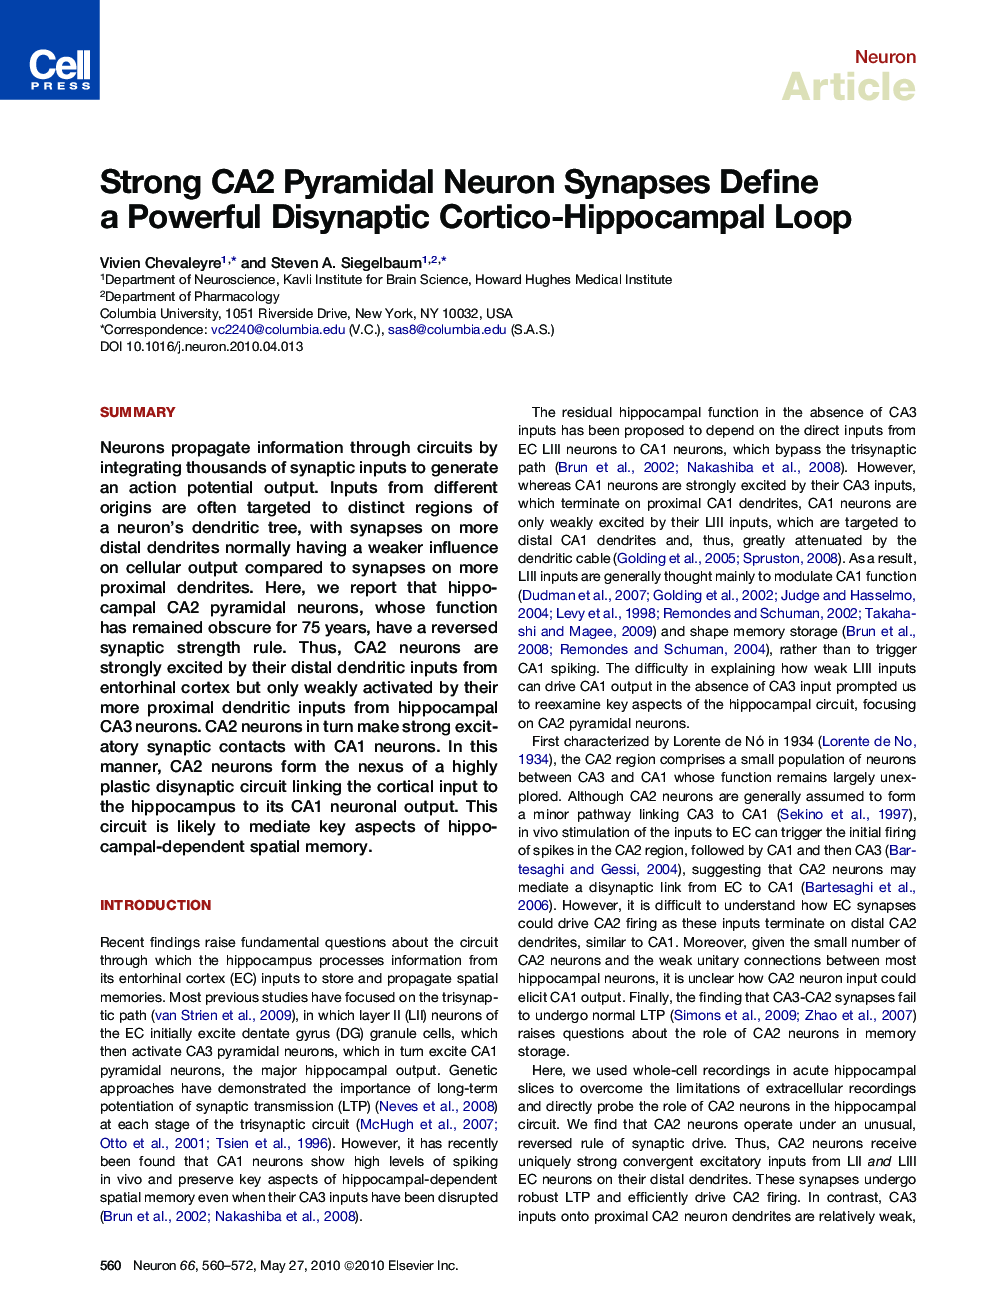 Strong CA2 Pyramidal Neuron Synapses Define a Powerful Disynaptic Cortico-Hippocampal Loop